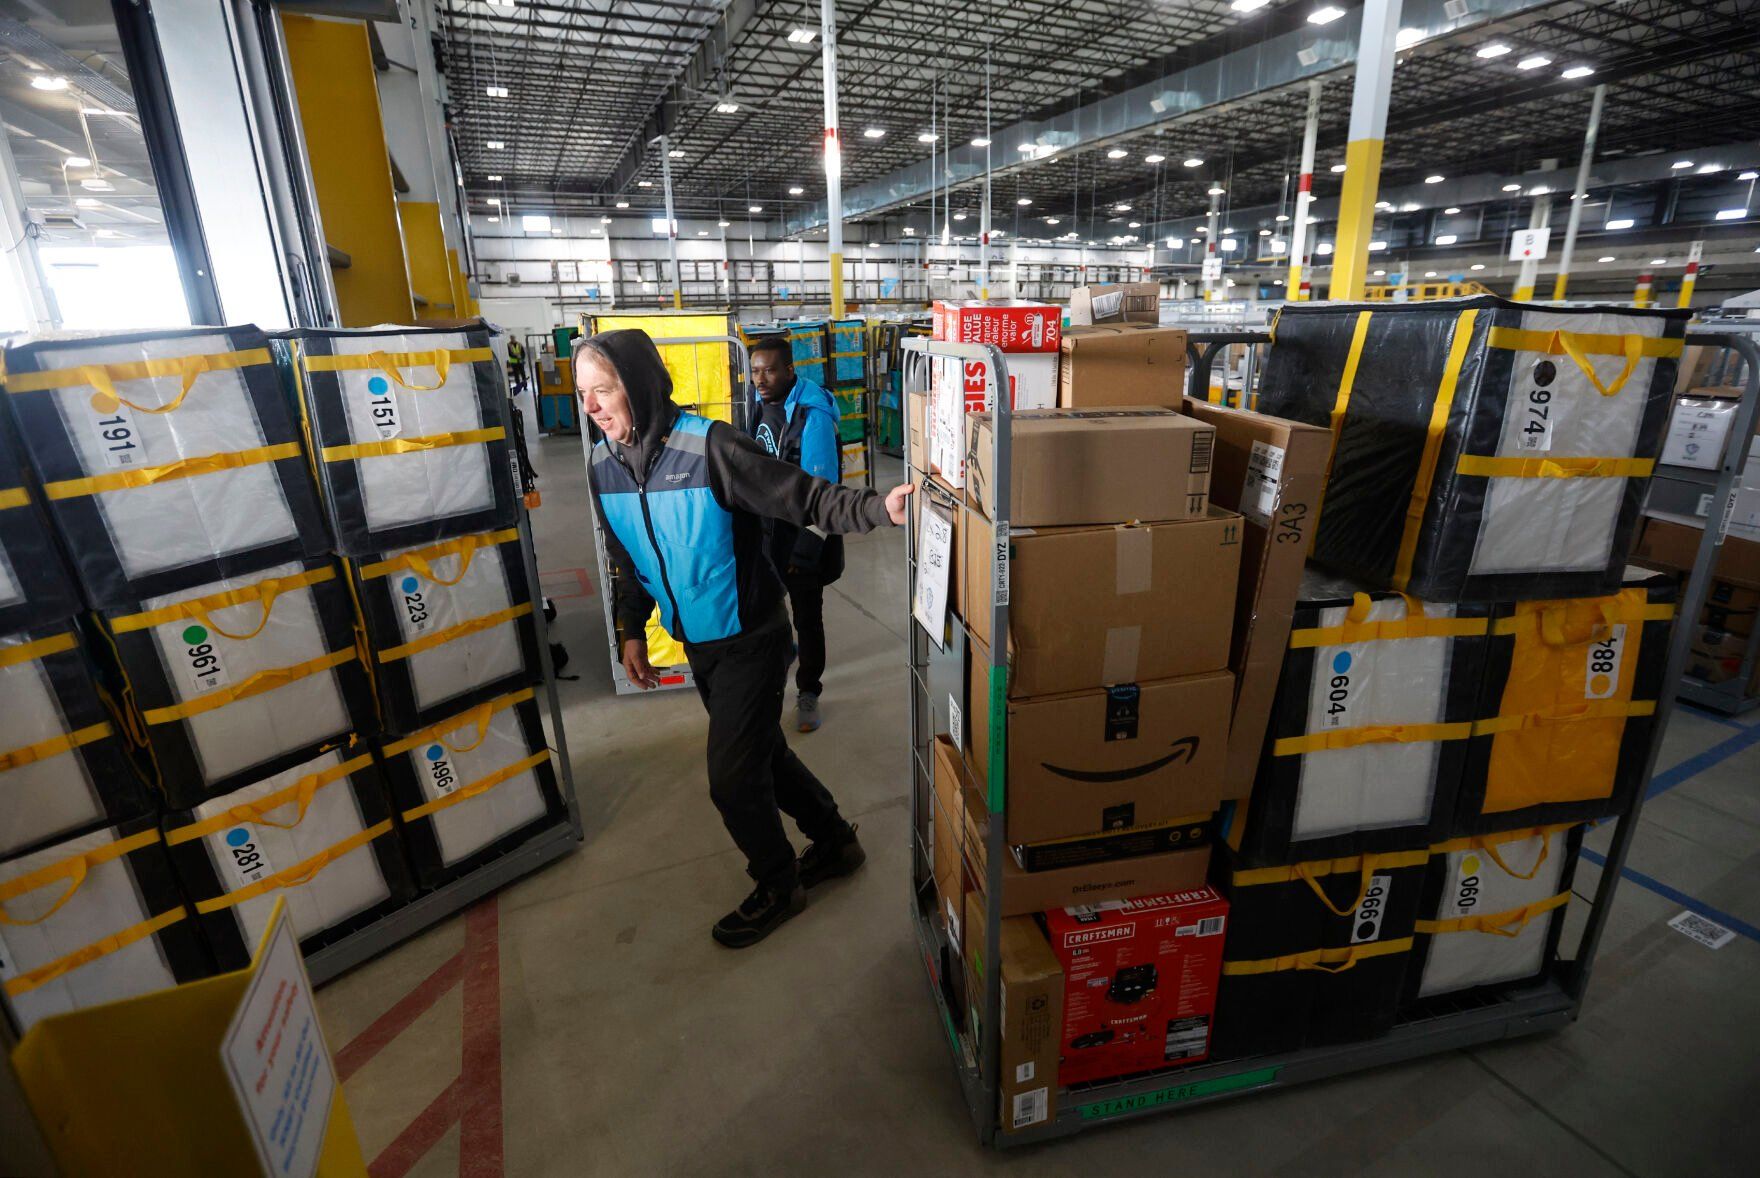 Steven Hemmer loads packages into vehicles at Amazon in Dubuque on Tuesday, Feb. 21, 2023.    PHOTO CREDIT: JESSICA REILLY